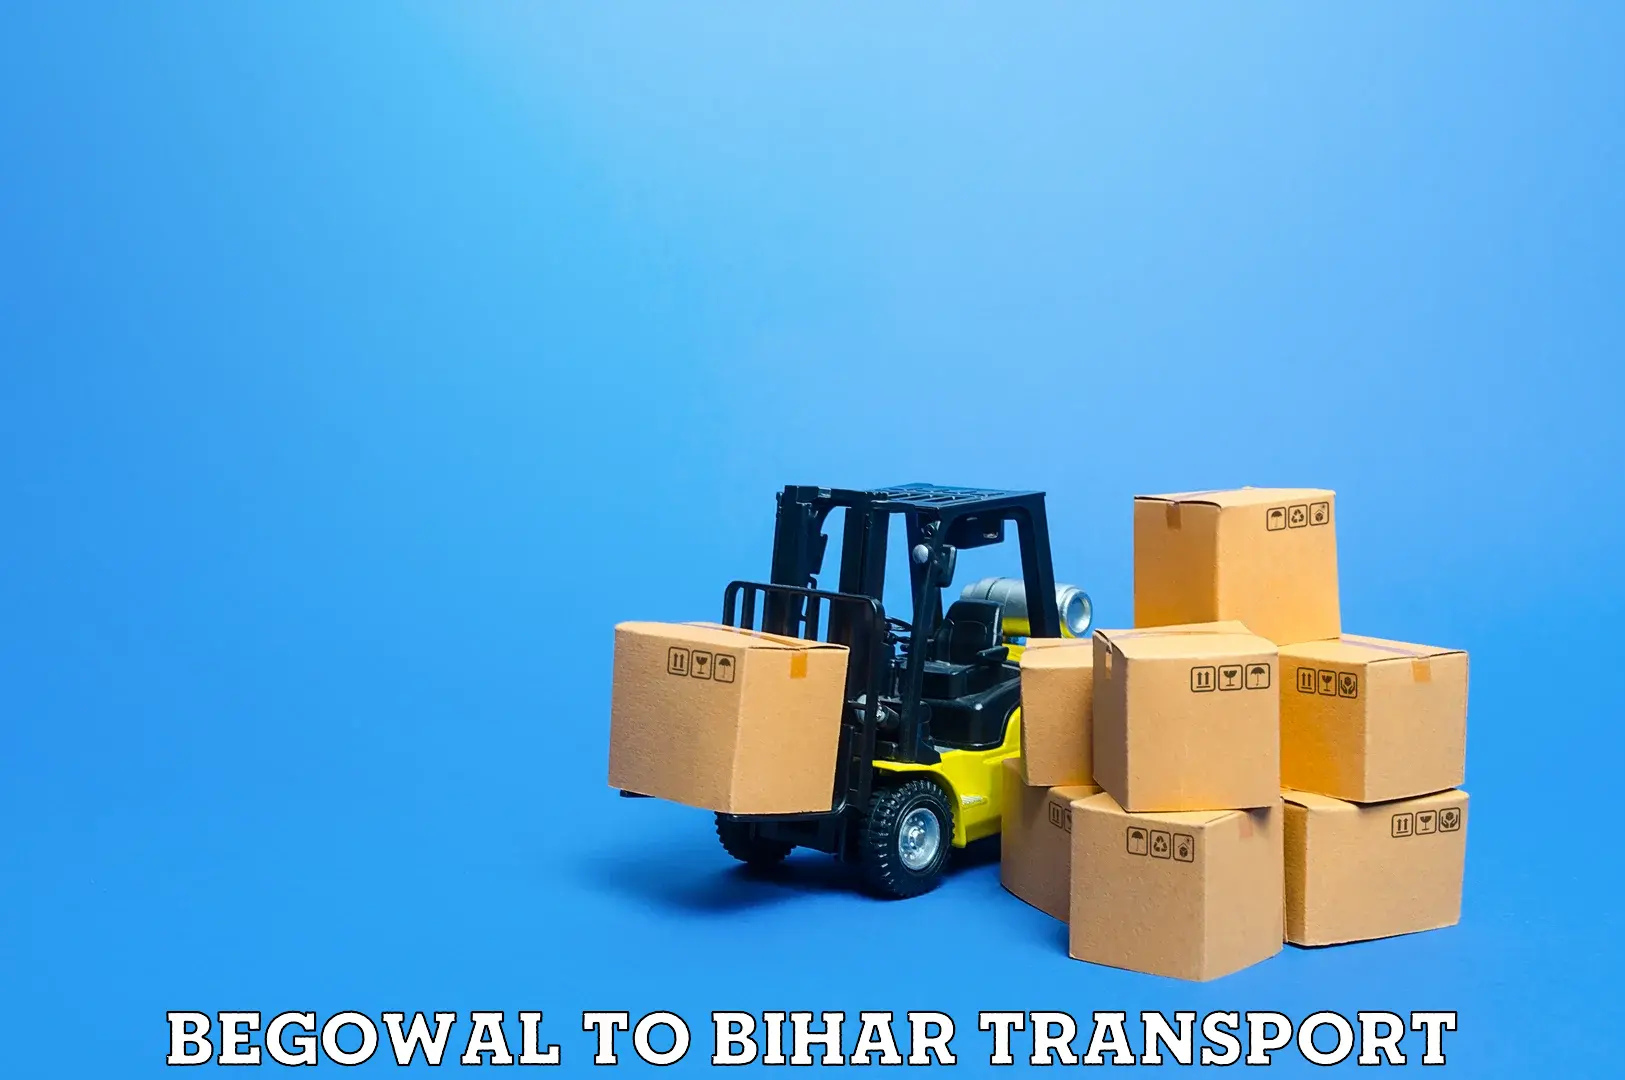 Pick up transport service Begowal to Bhorey